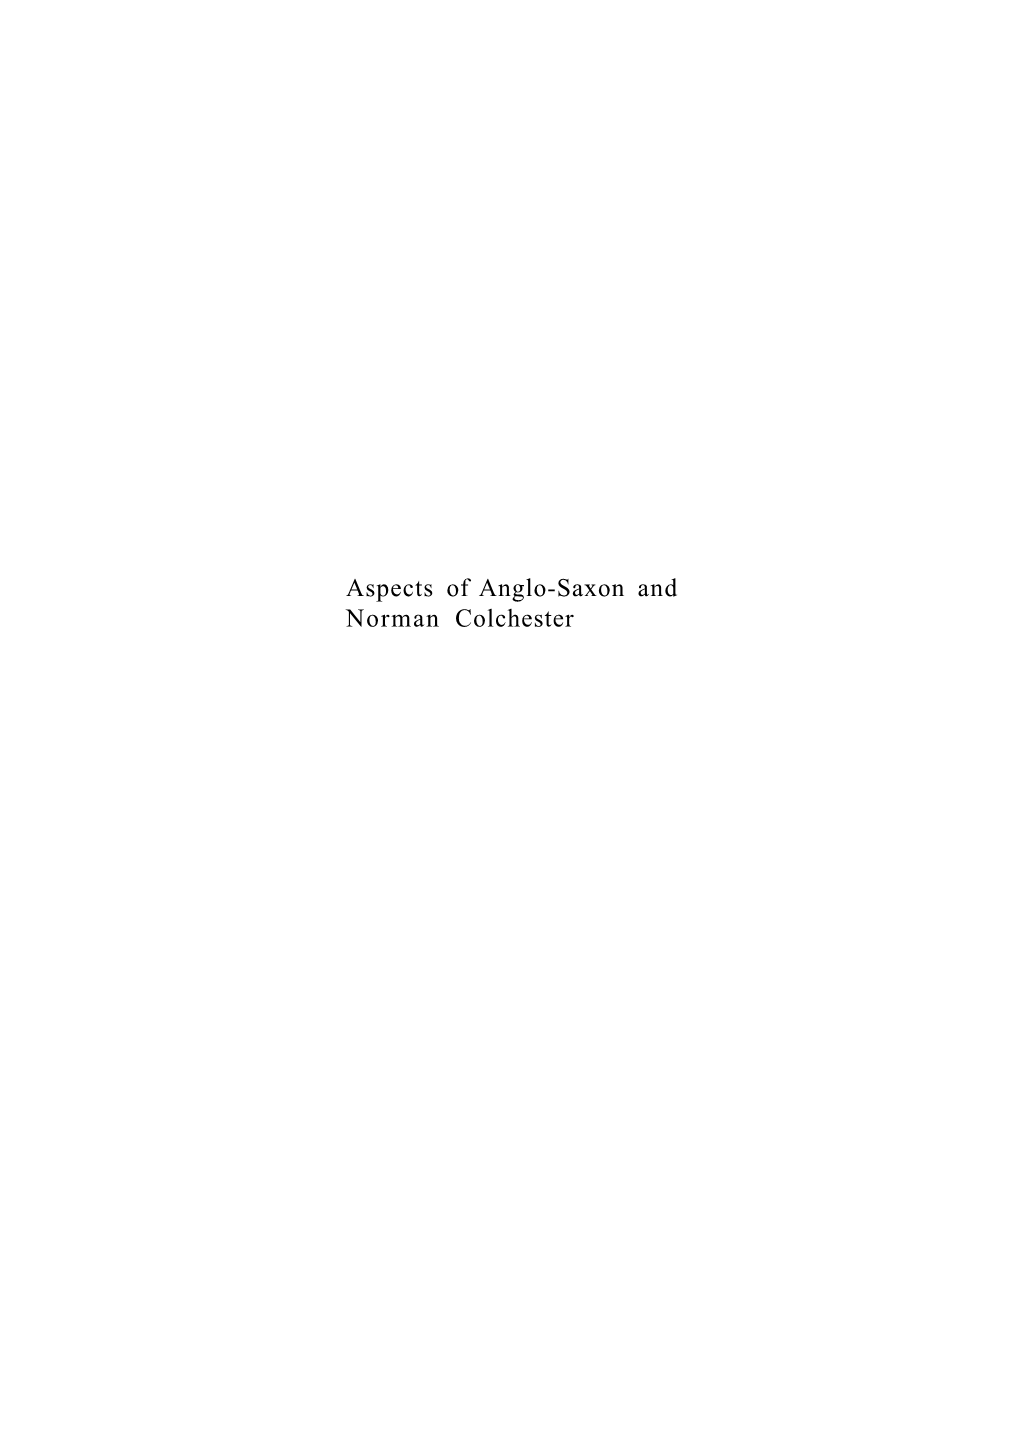 Aspects of Anglo-Saxon and Norman Colchester Colchester Archaeological Reports General Editor: Philip Crummy Published by the Colchester Archaeological Trust Ltd